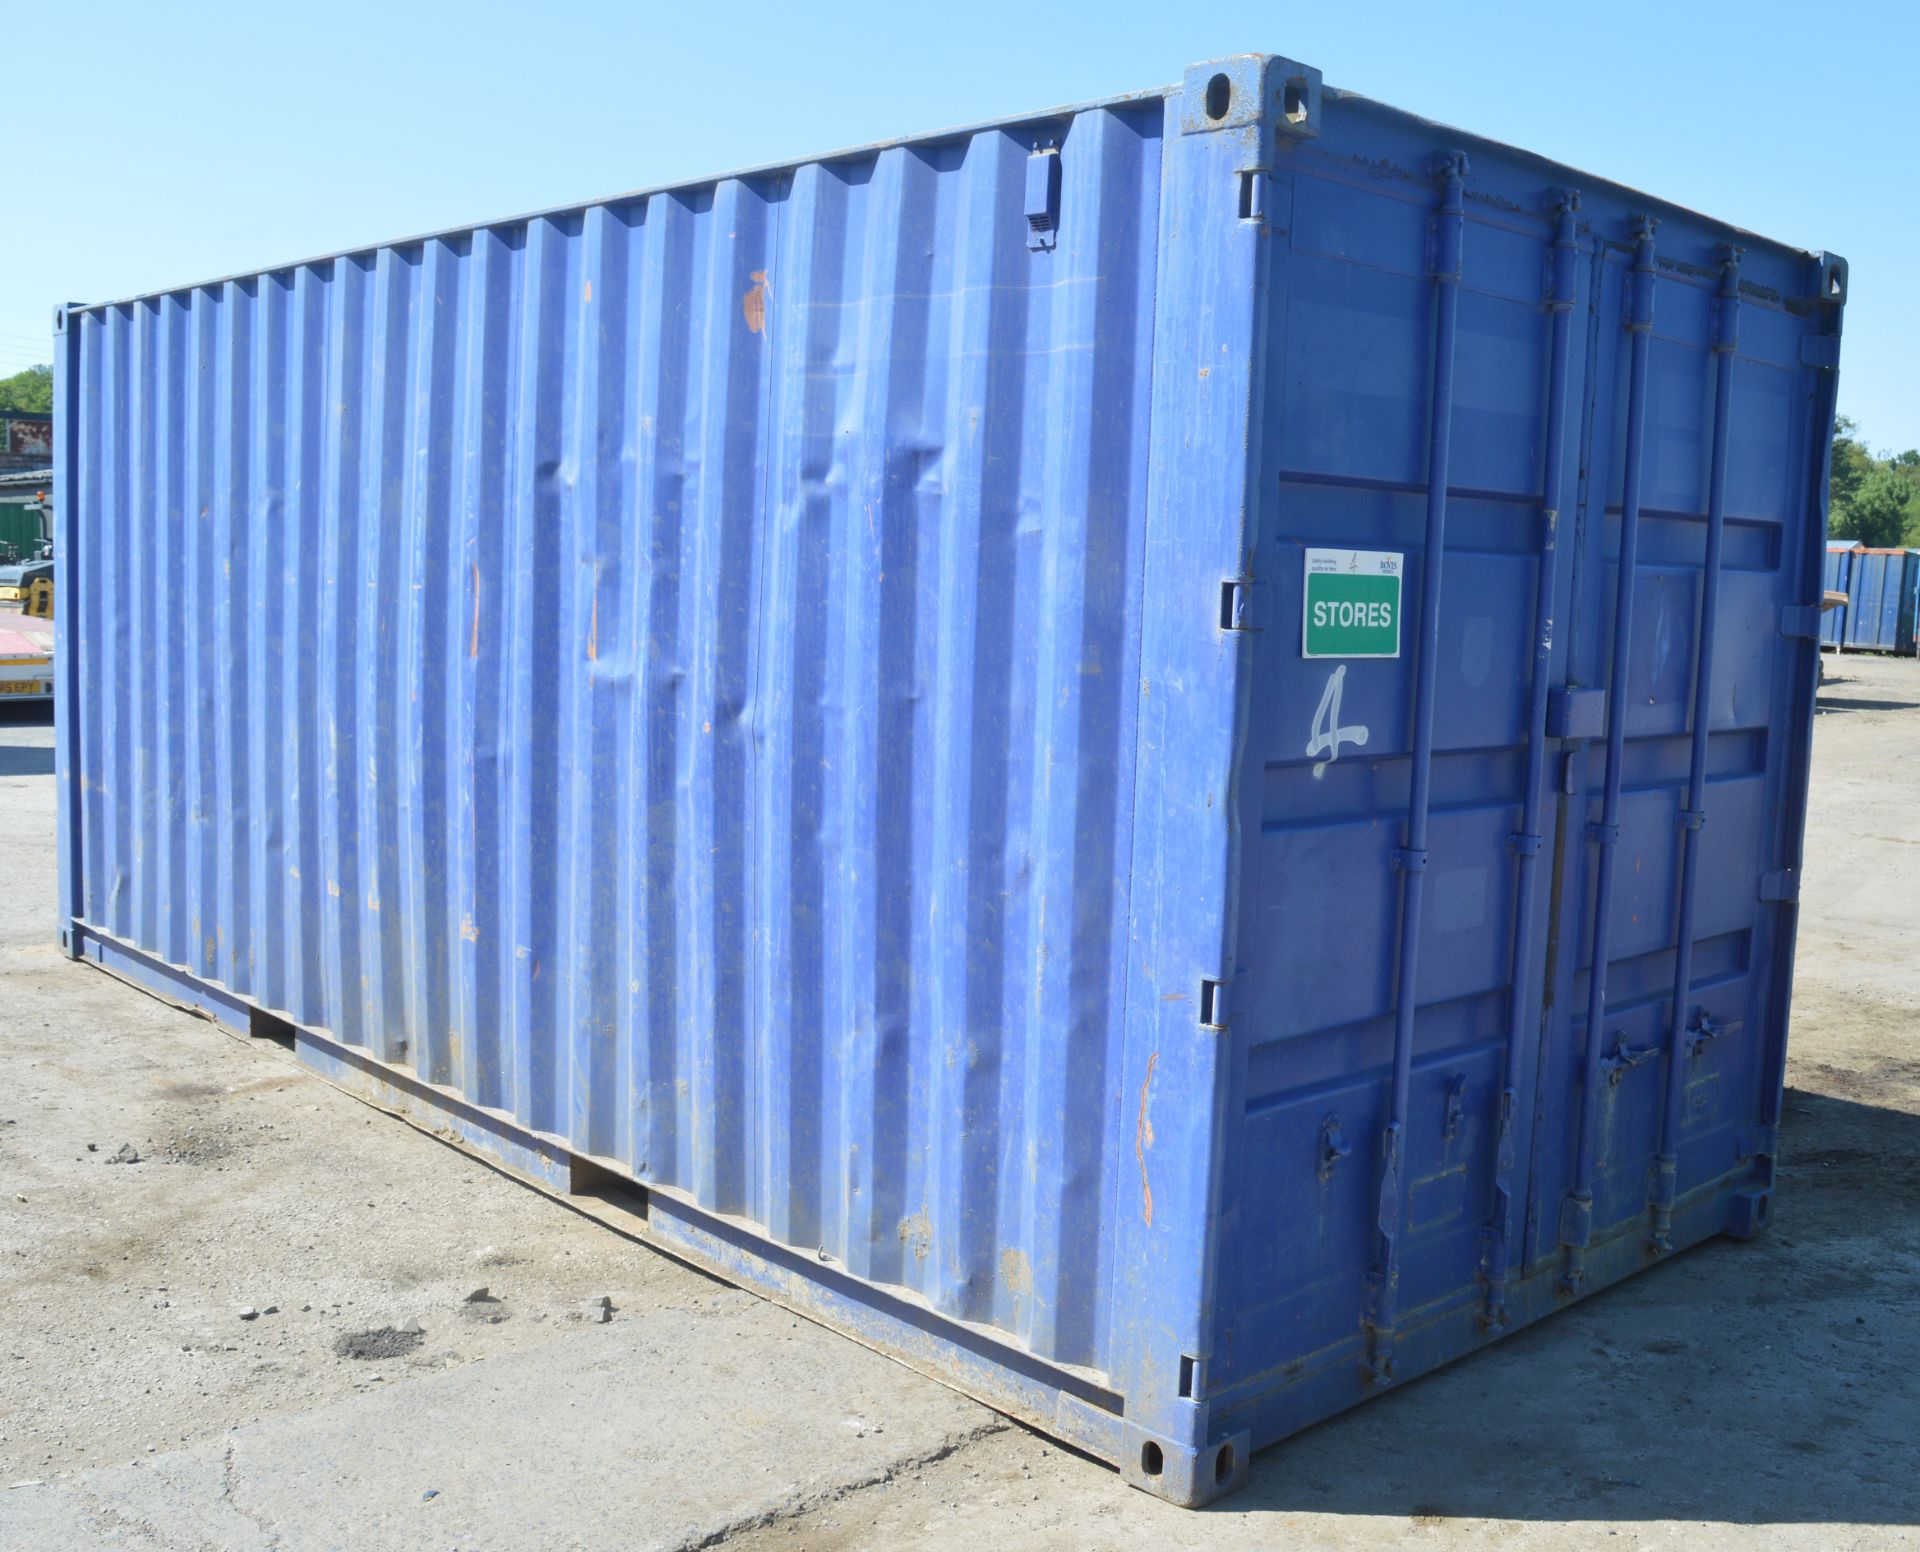 20 ft x 8 ft steel shipping container 2998 - Image 2 of 6